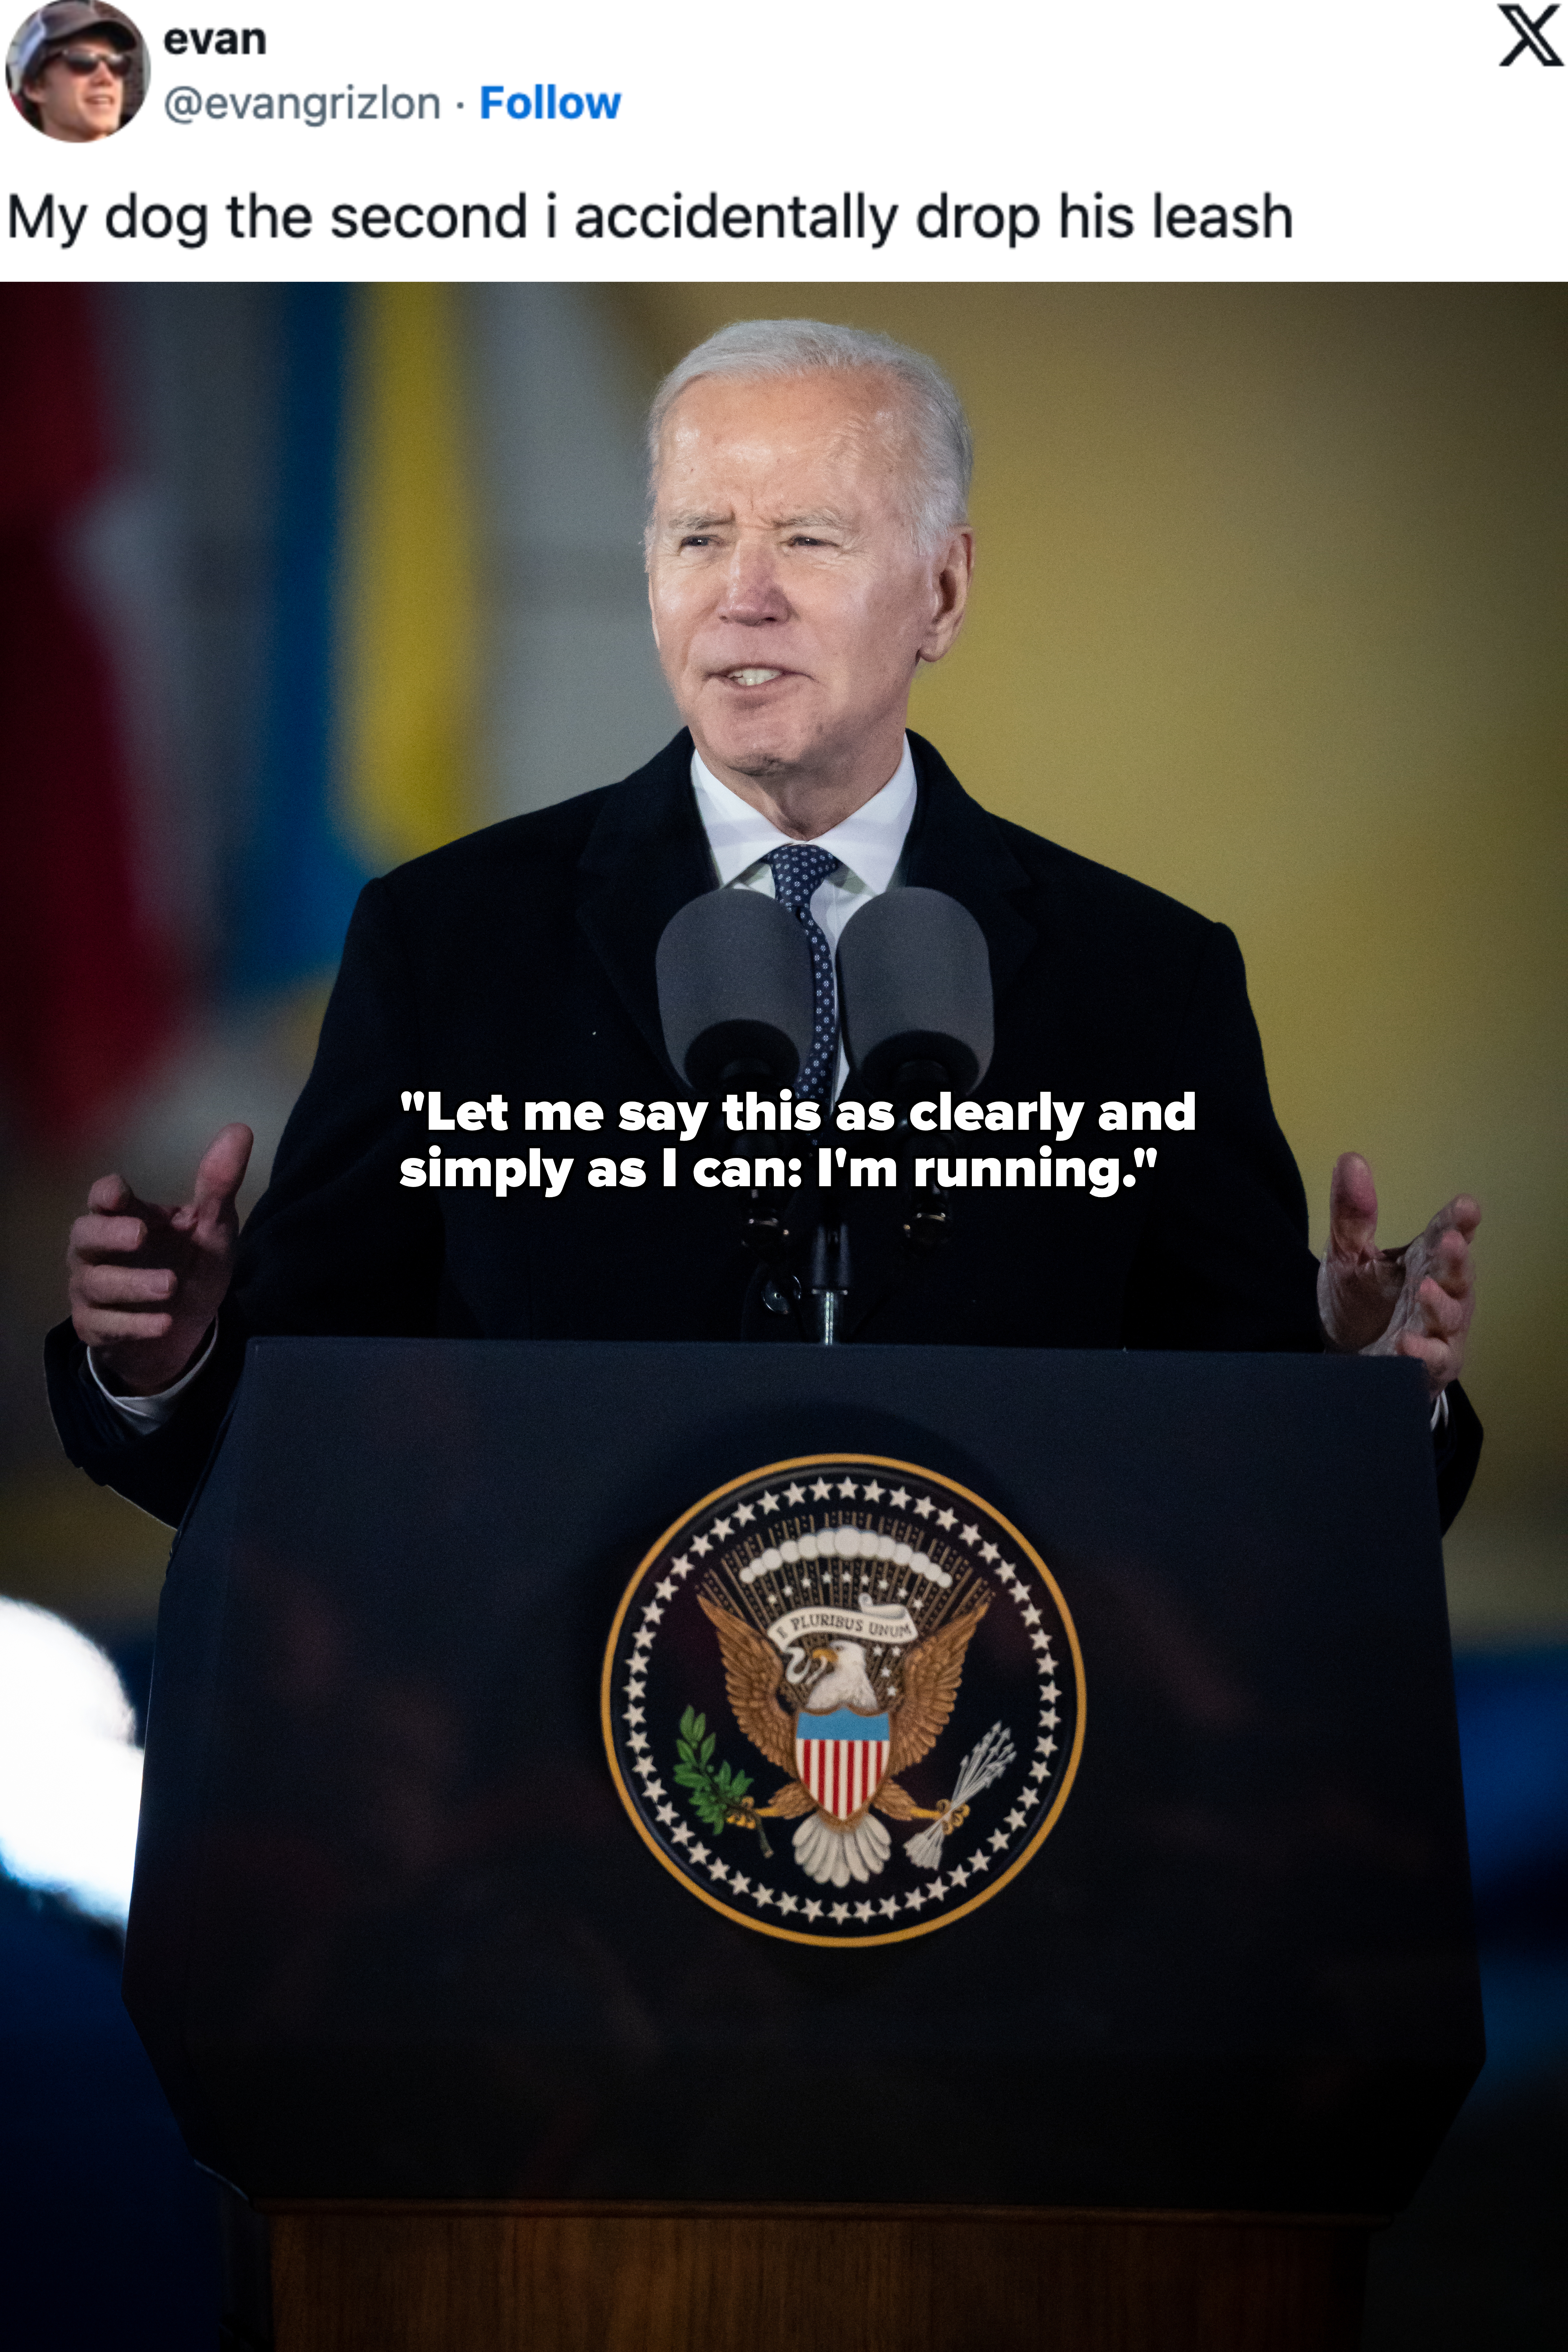 President Joe Biden speaks at a podium with the presidential seal, gesturing with his hands. Flags are visible in the background